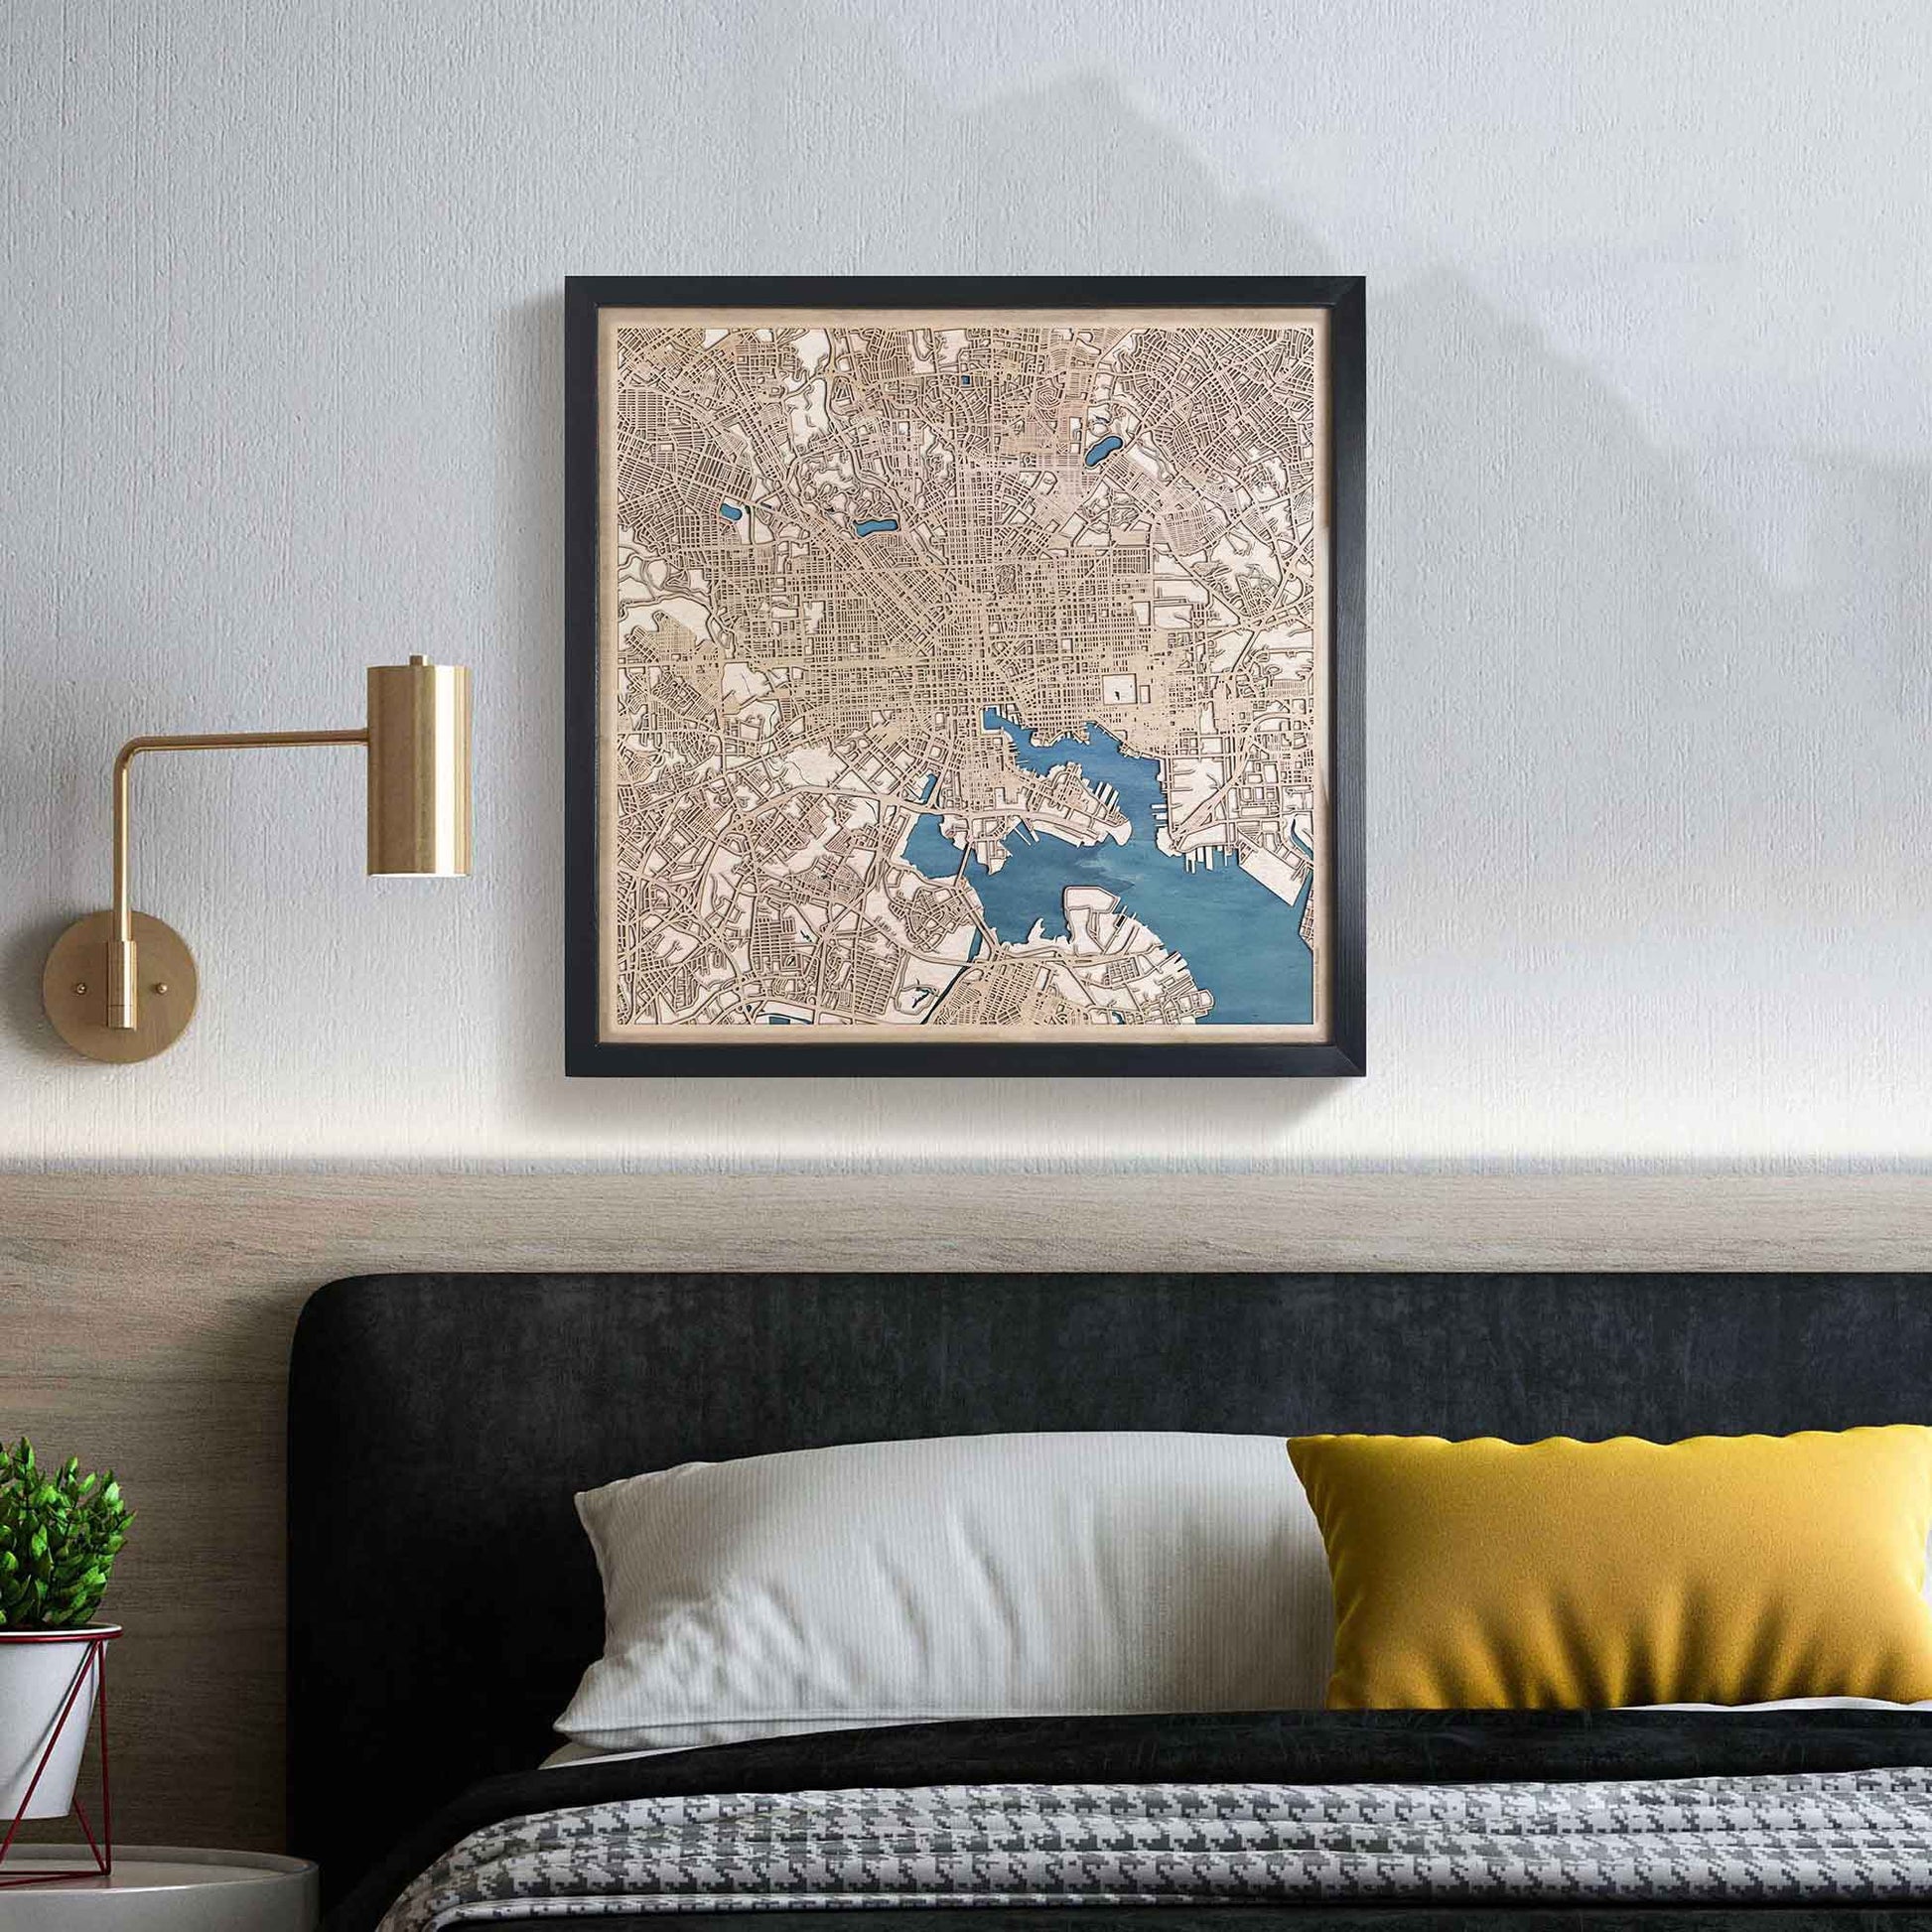 Baltimore Wooden Map by CityWood - Custom Wood Map Art - Unique Laser Cut Engraved - Anniversary Gift